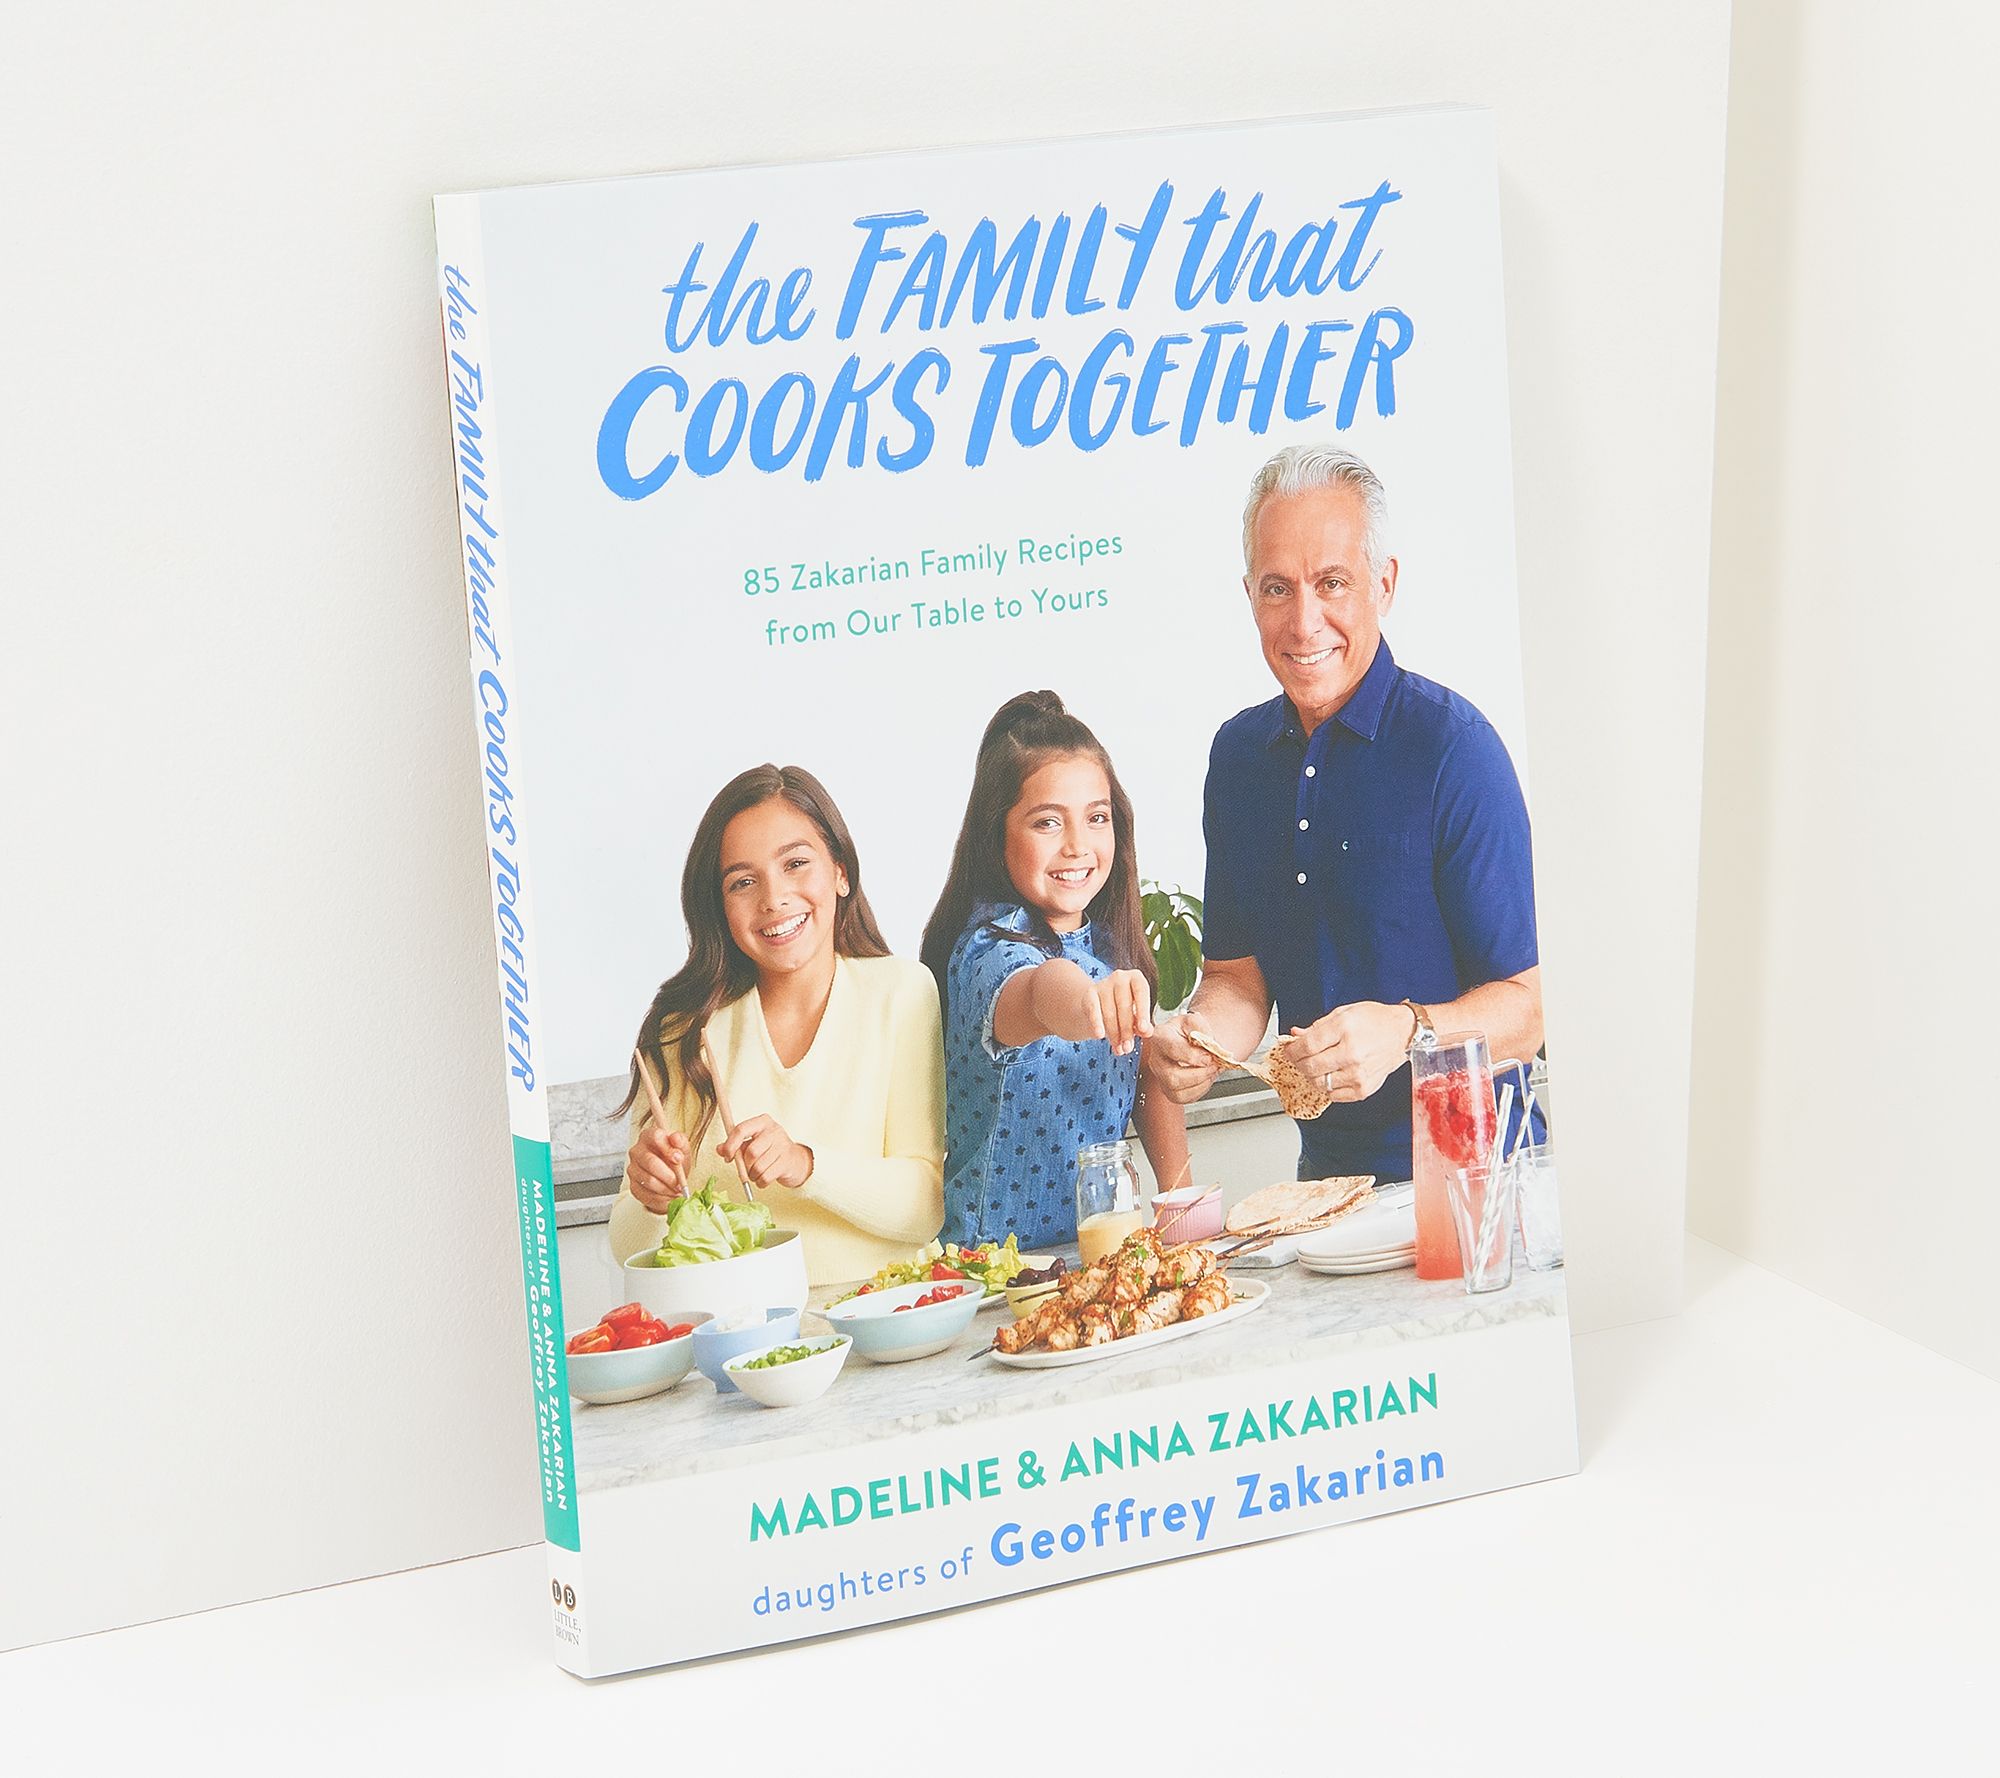 Dinner Is Served: Geoffrey Zakarian Shares A Page From His New